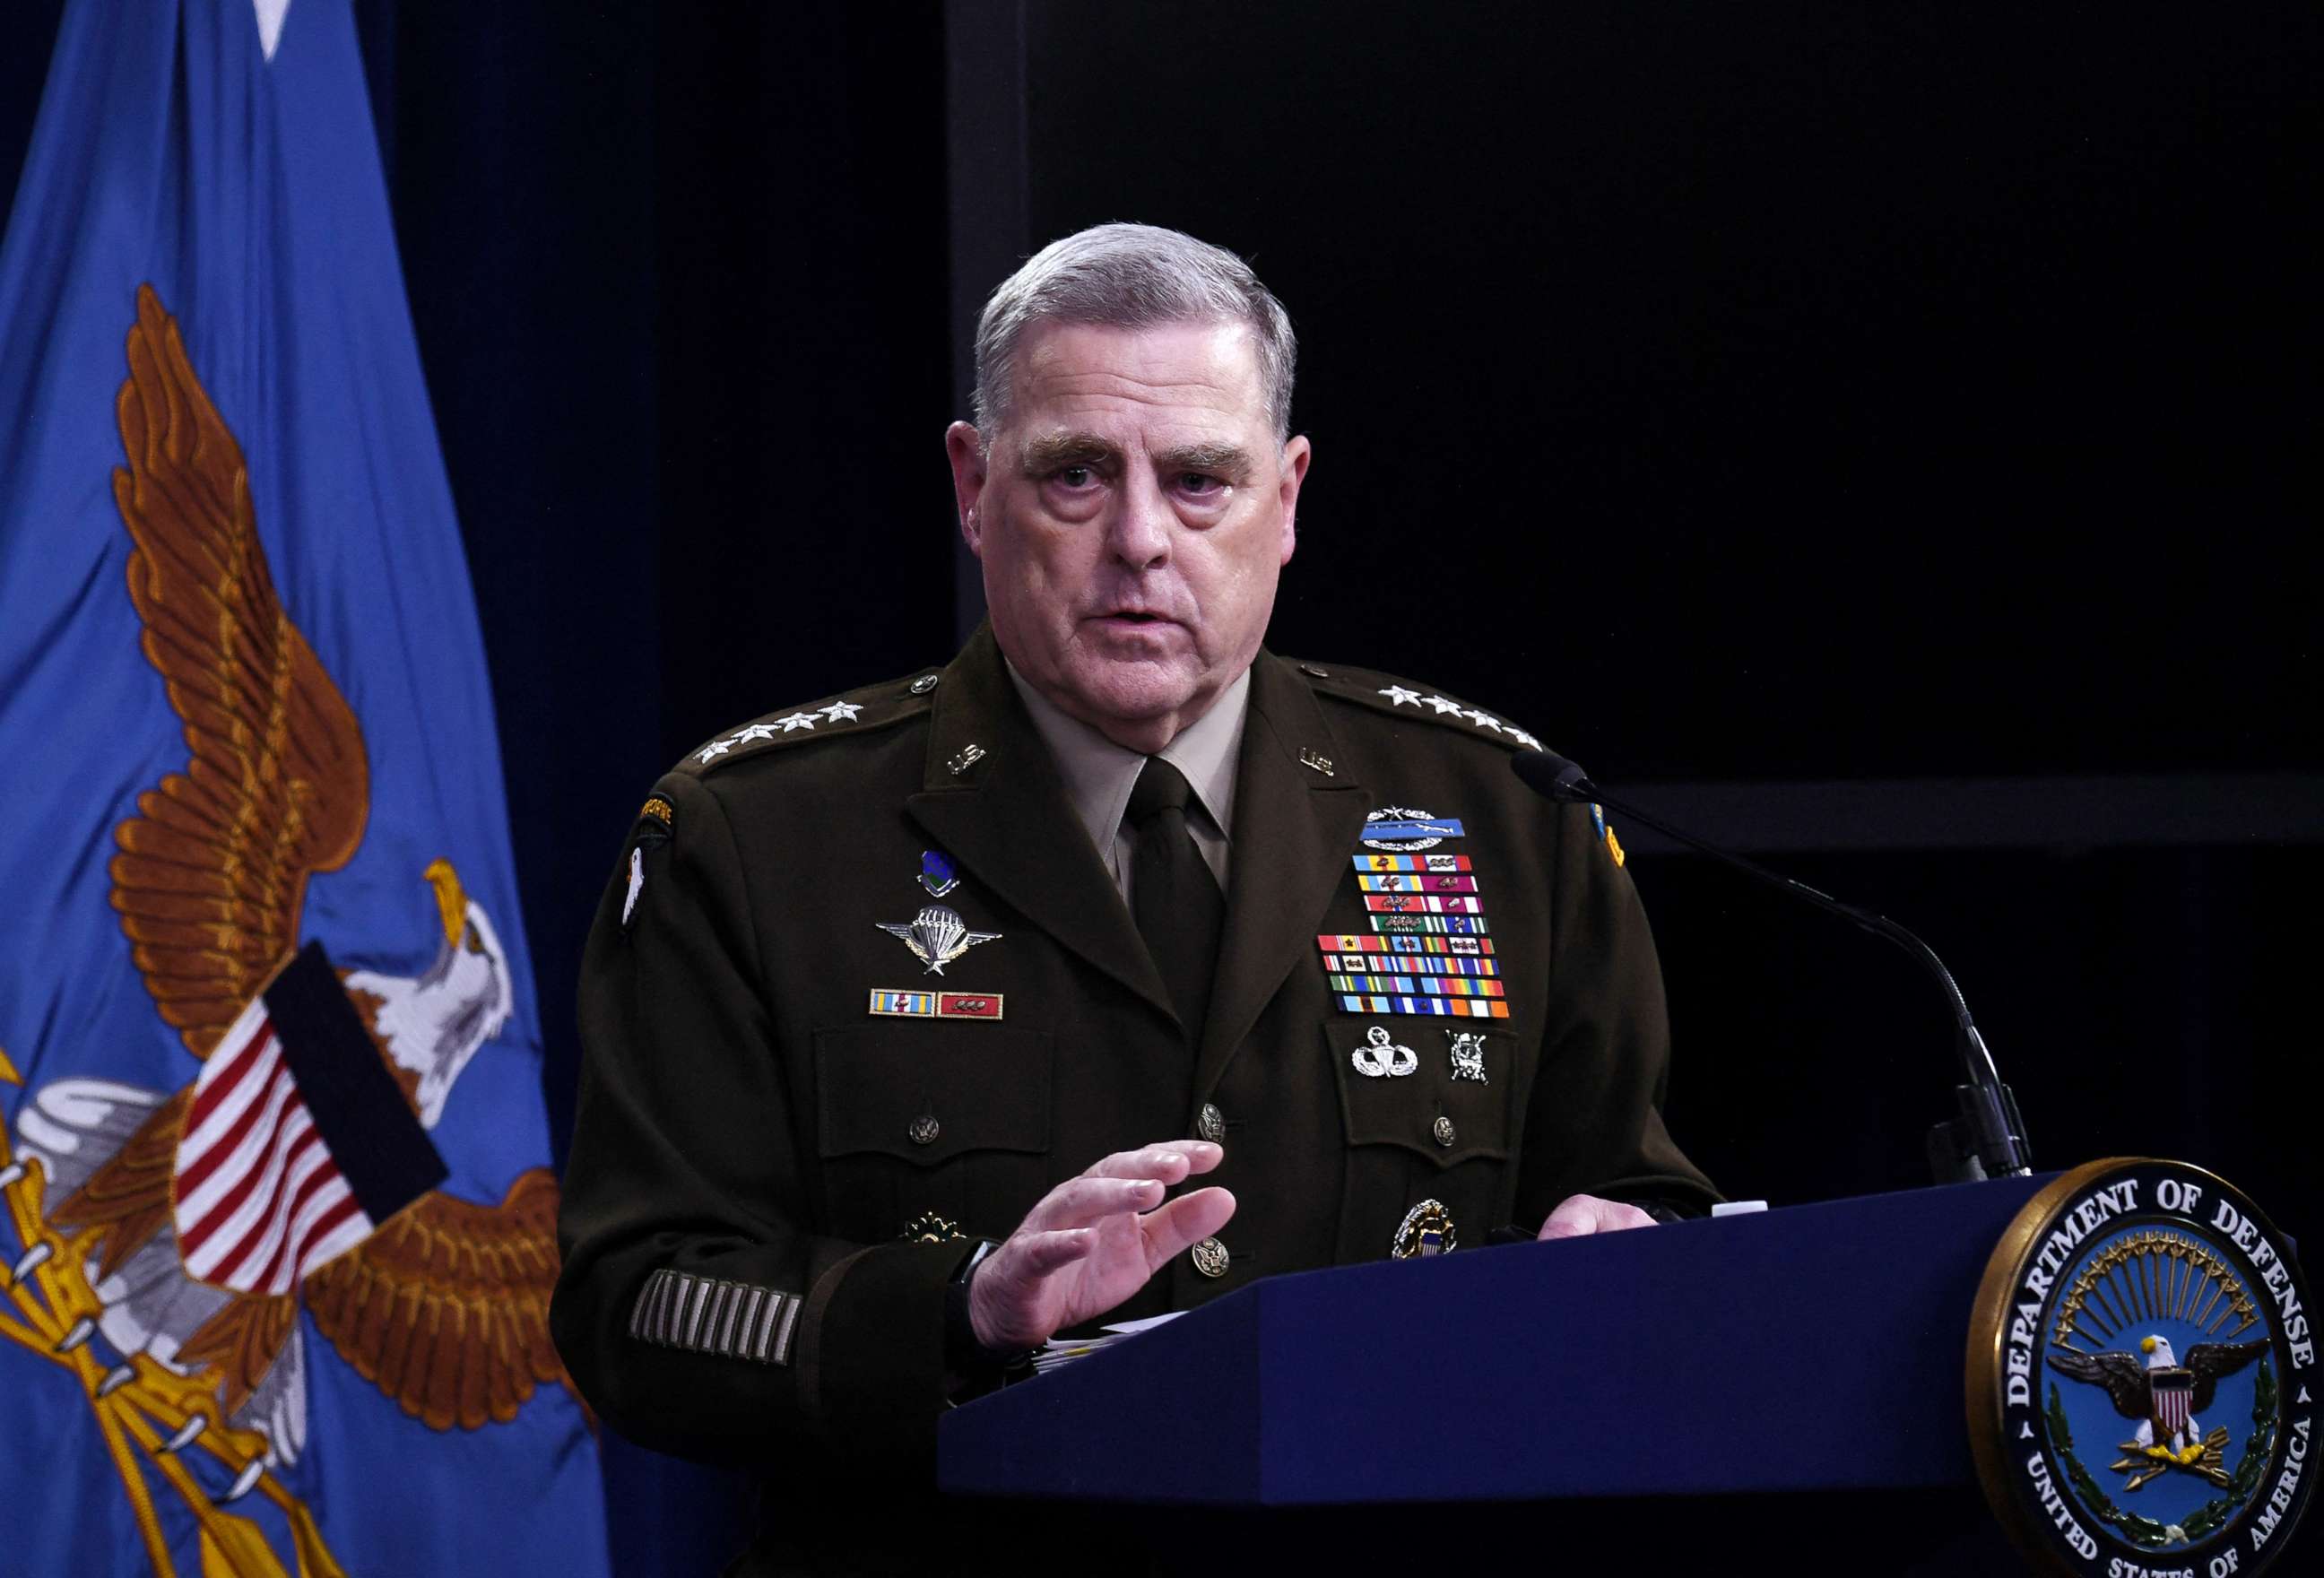 PHOTO: Chairman of the Joint Chiefs of Staff General Mark Milley speaks to the press on Aug. 18, 2021 at the Pentagon in Washington.